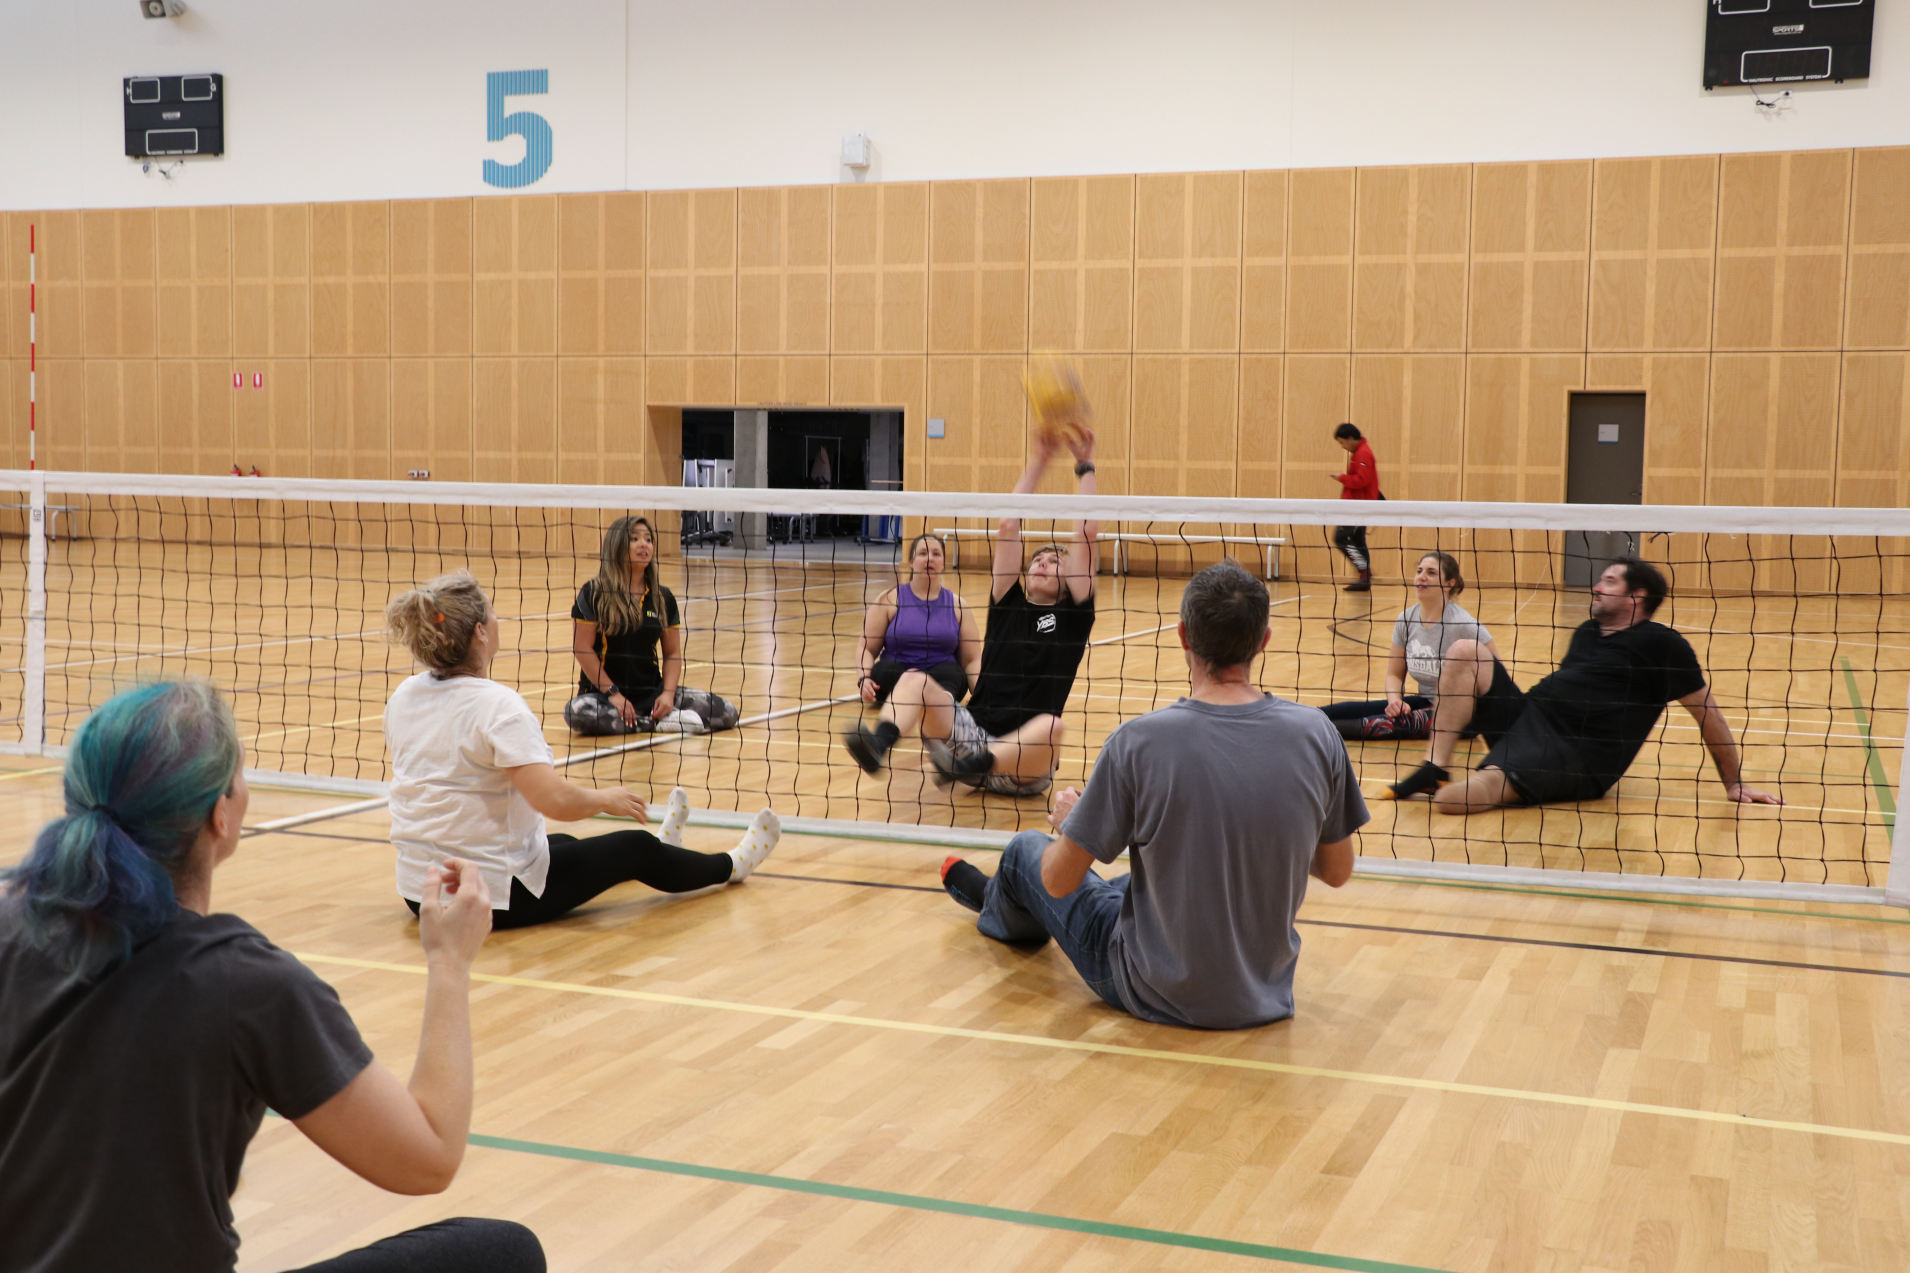 Seated volleyball game